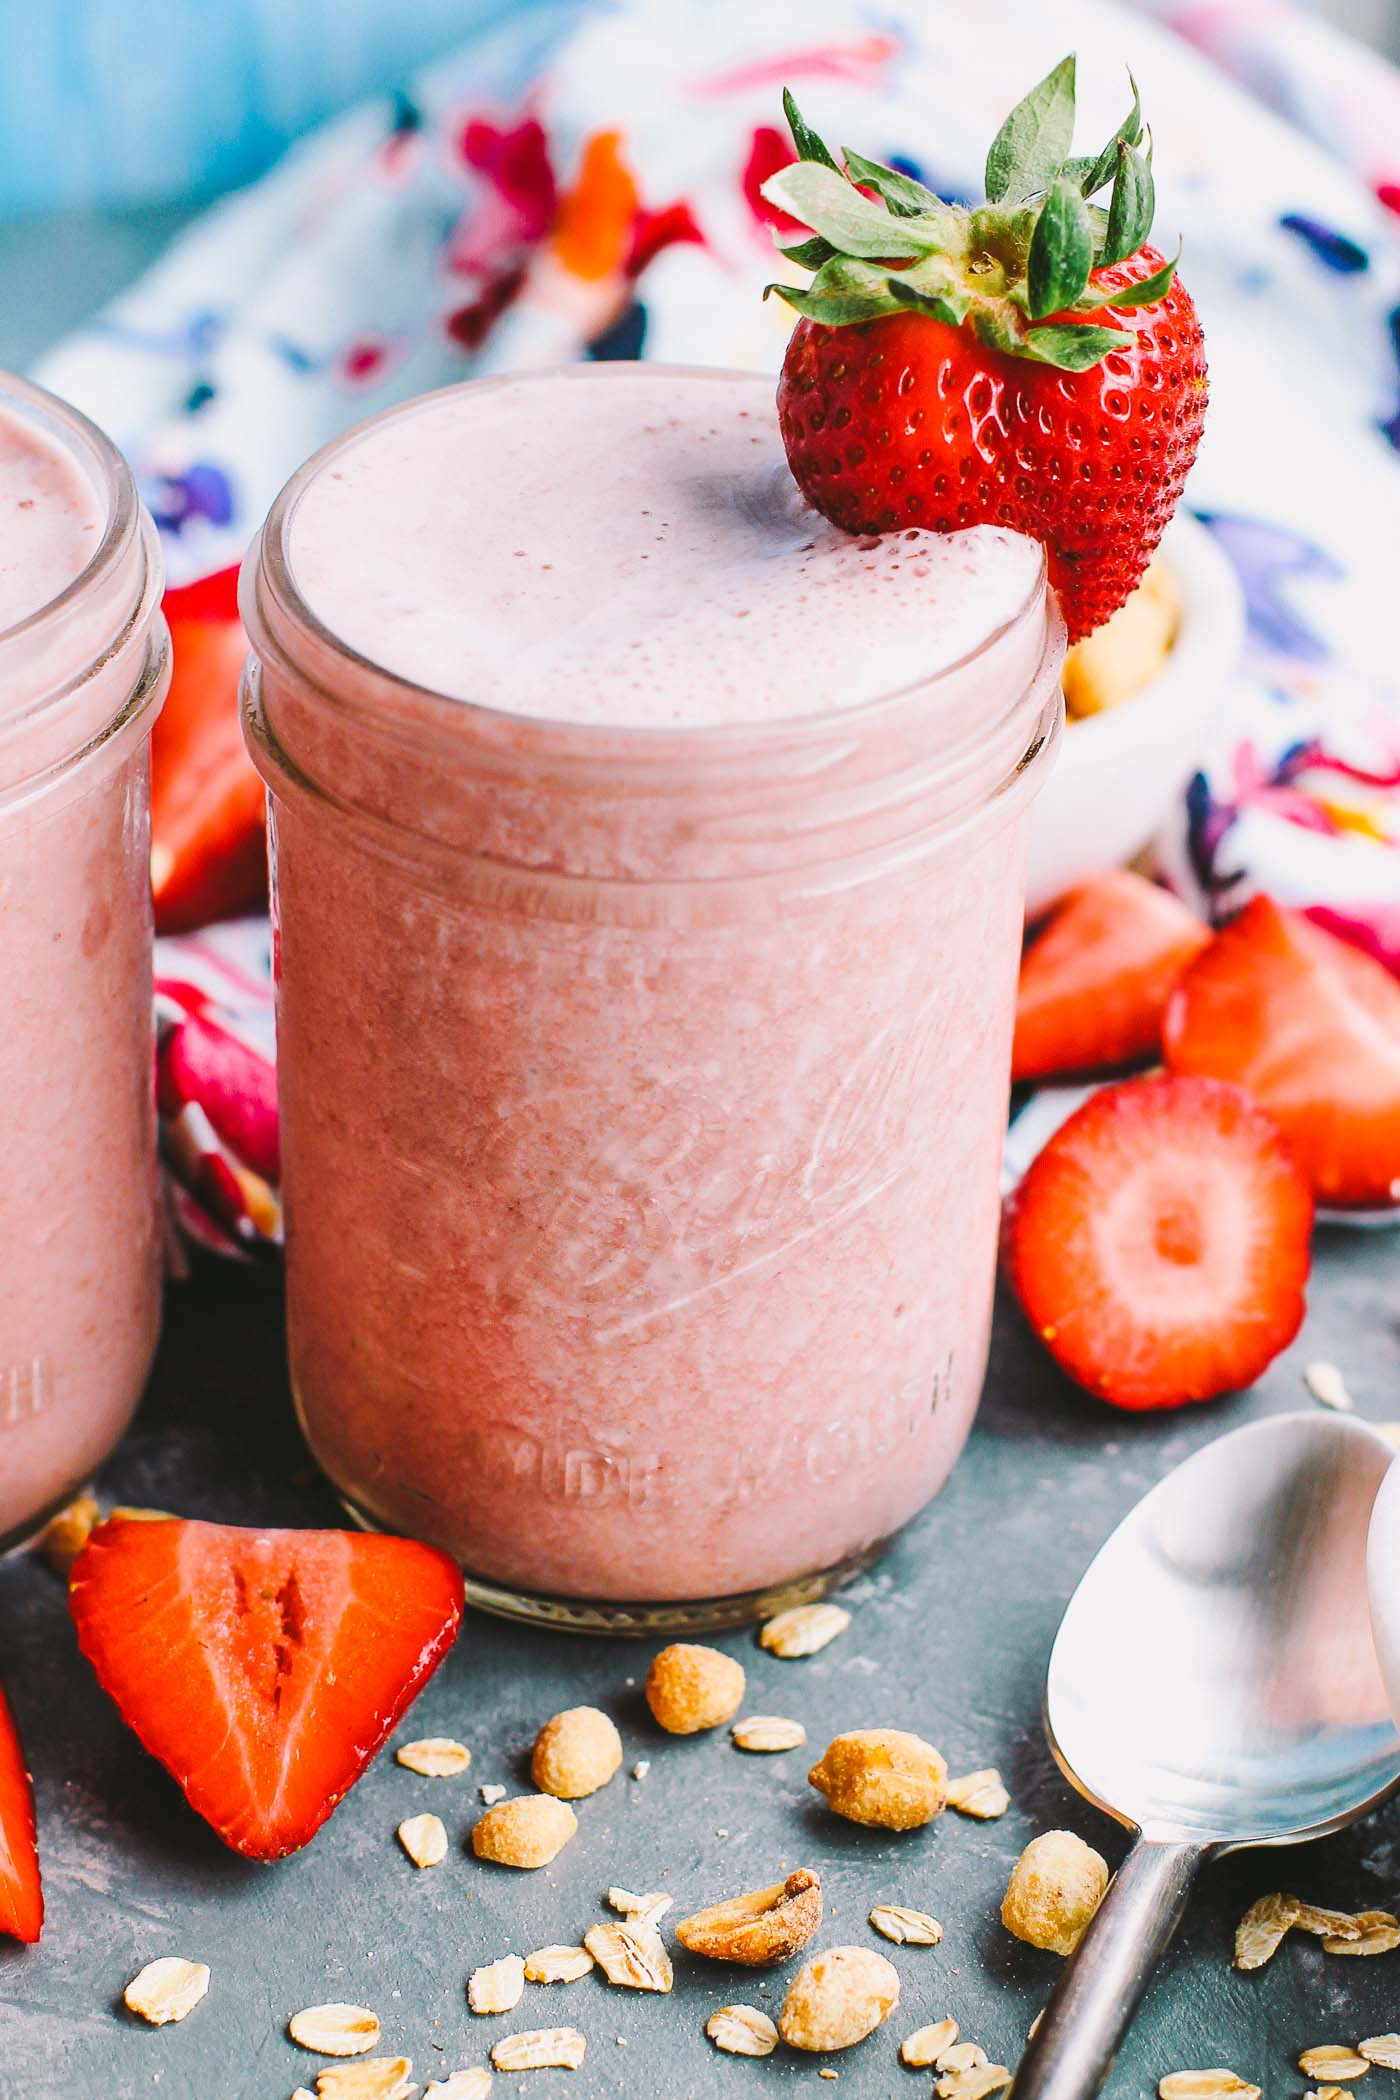 Healthy Protein Smoothies
 strawberry pb&j protein smoothies plays well with butter